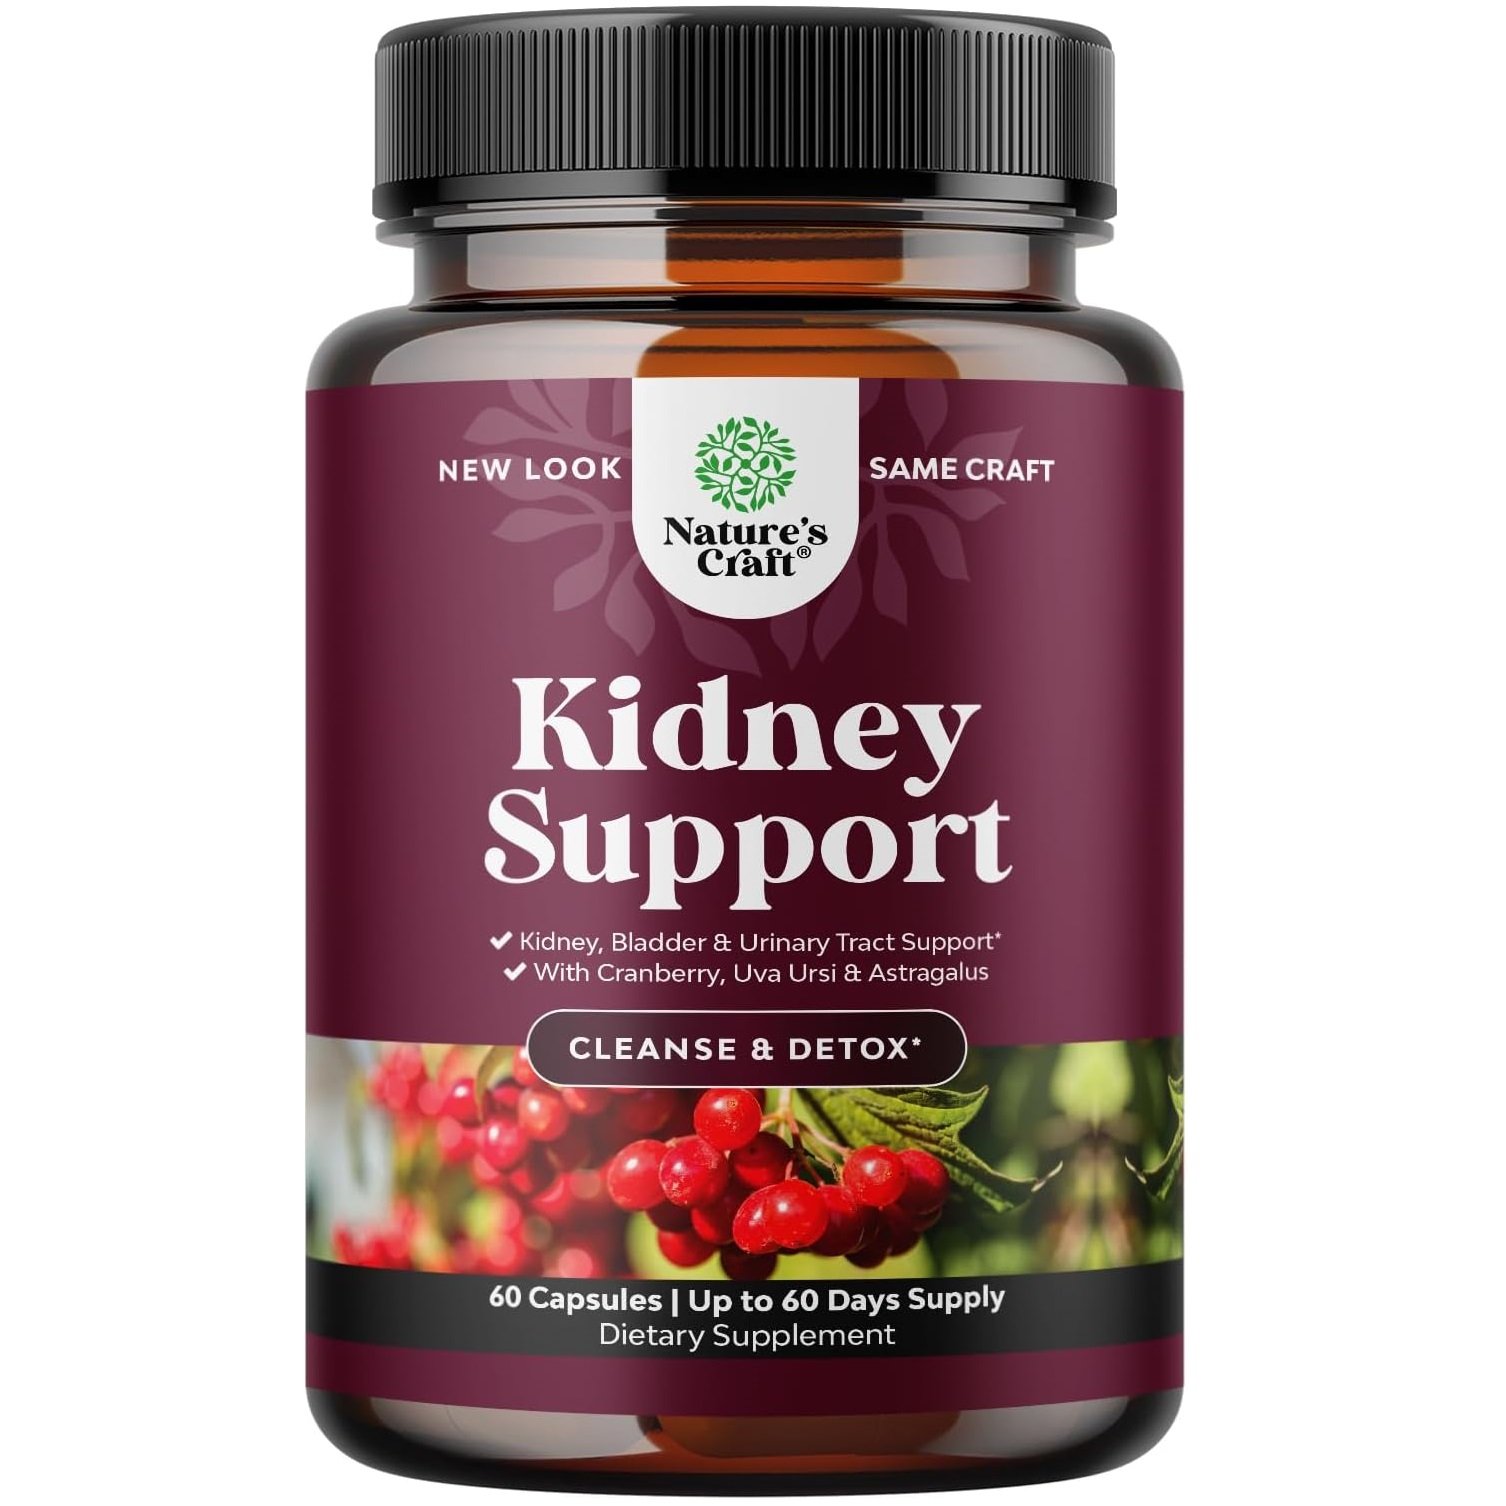 Kidney-Support-Cranberry-Pills-for-Women-and-Men